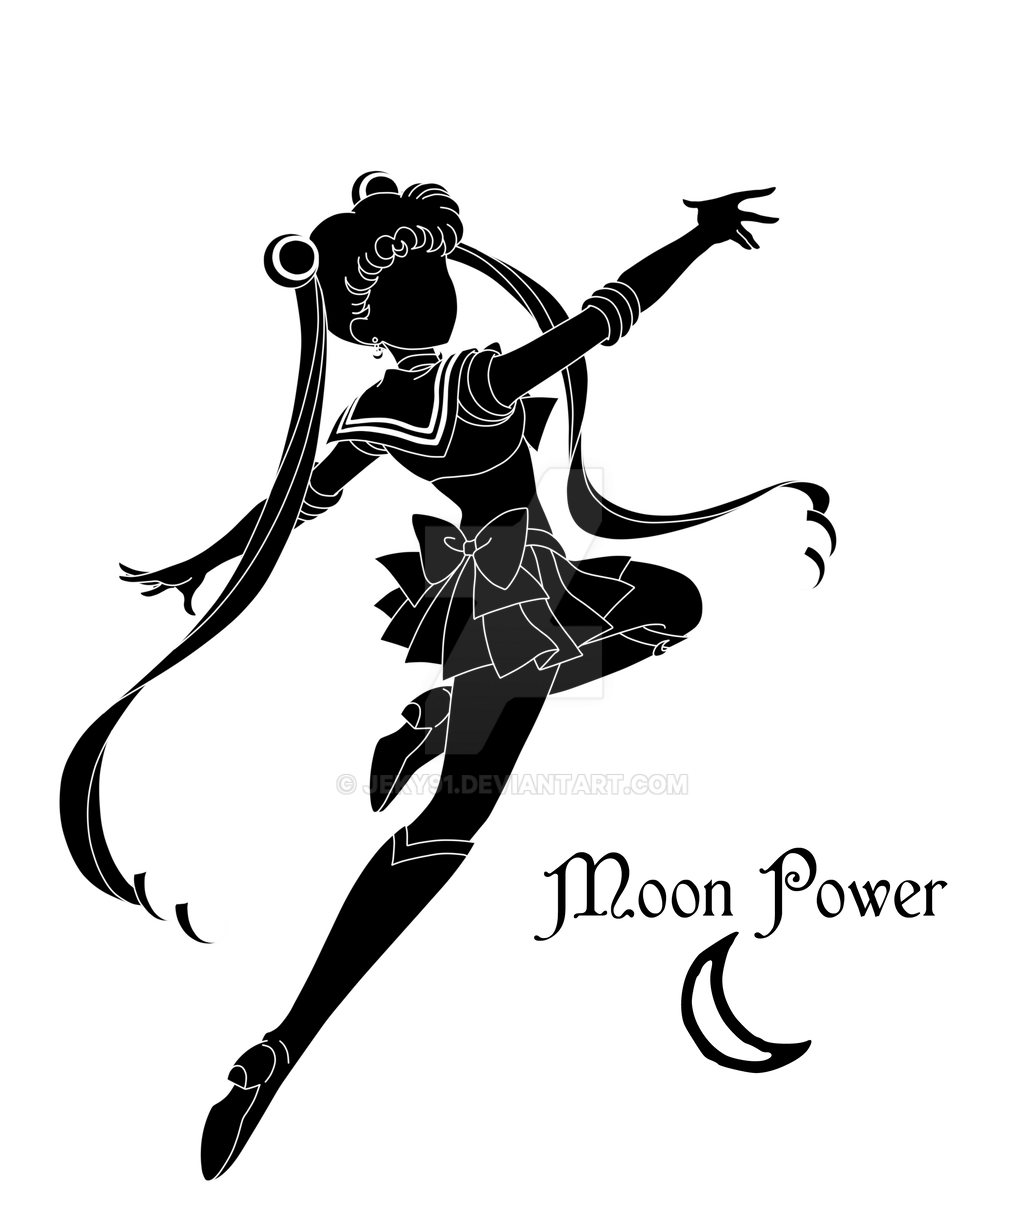 Sailor Moon Silhouette by jeky91 on DeviantArt